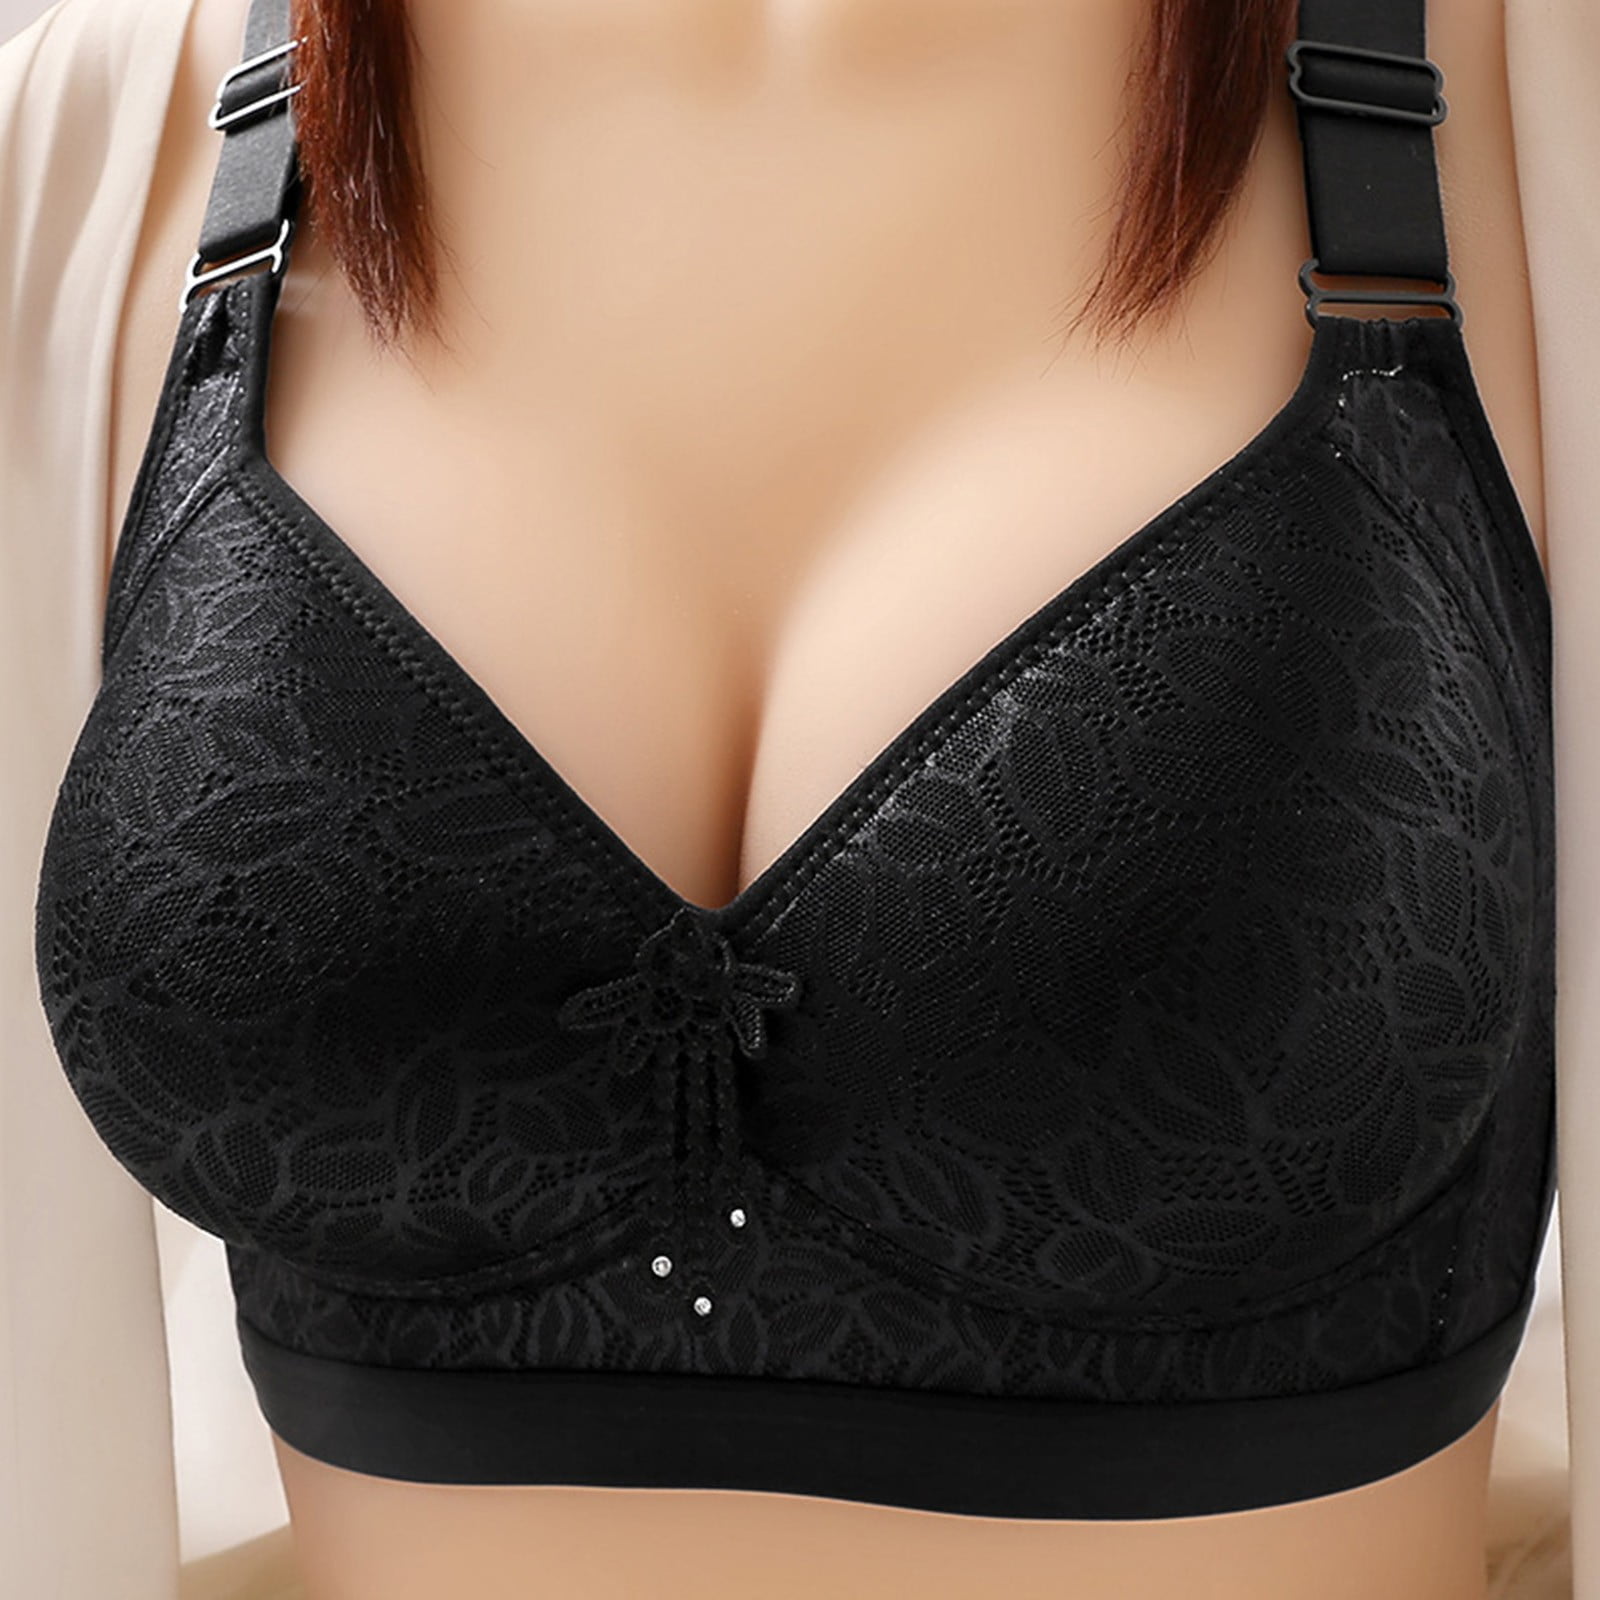 Girls Bras 12-14 Years Old, Women's Embroidered Glossy Comfortable  Breathable Bra Underwear No Rims, Minimizer Bra for Heavy Breast 